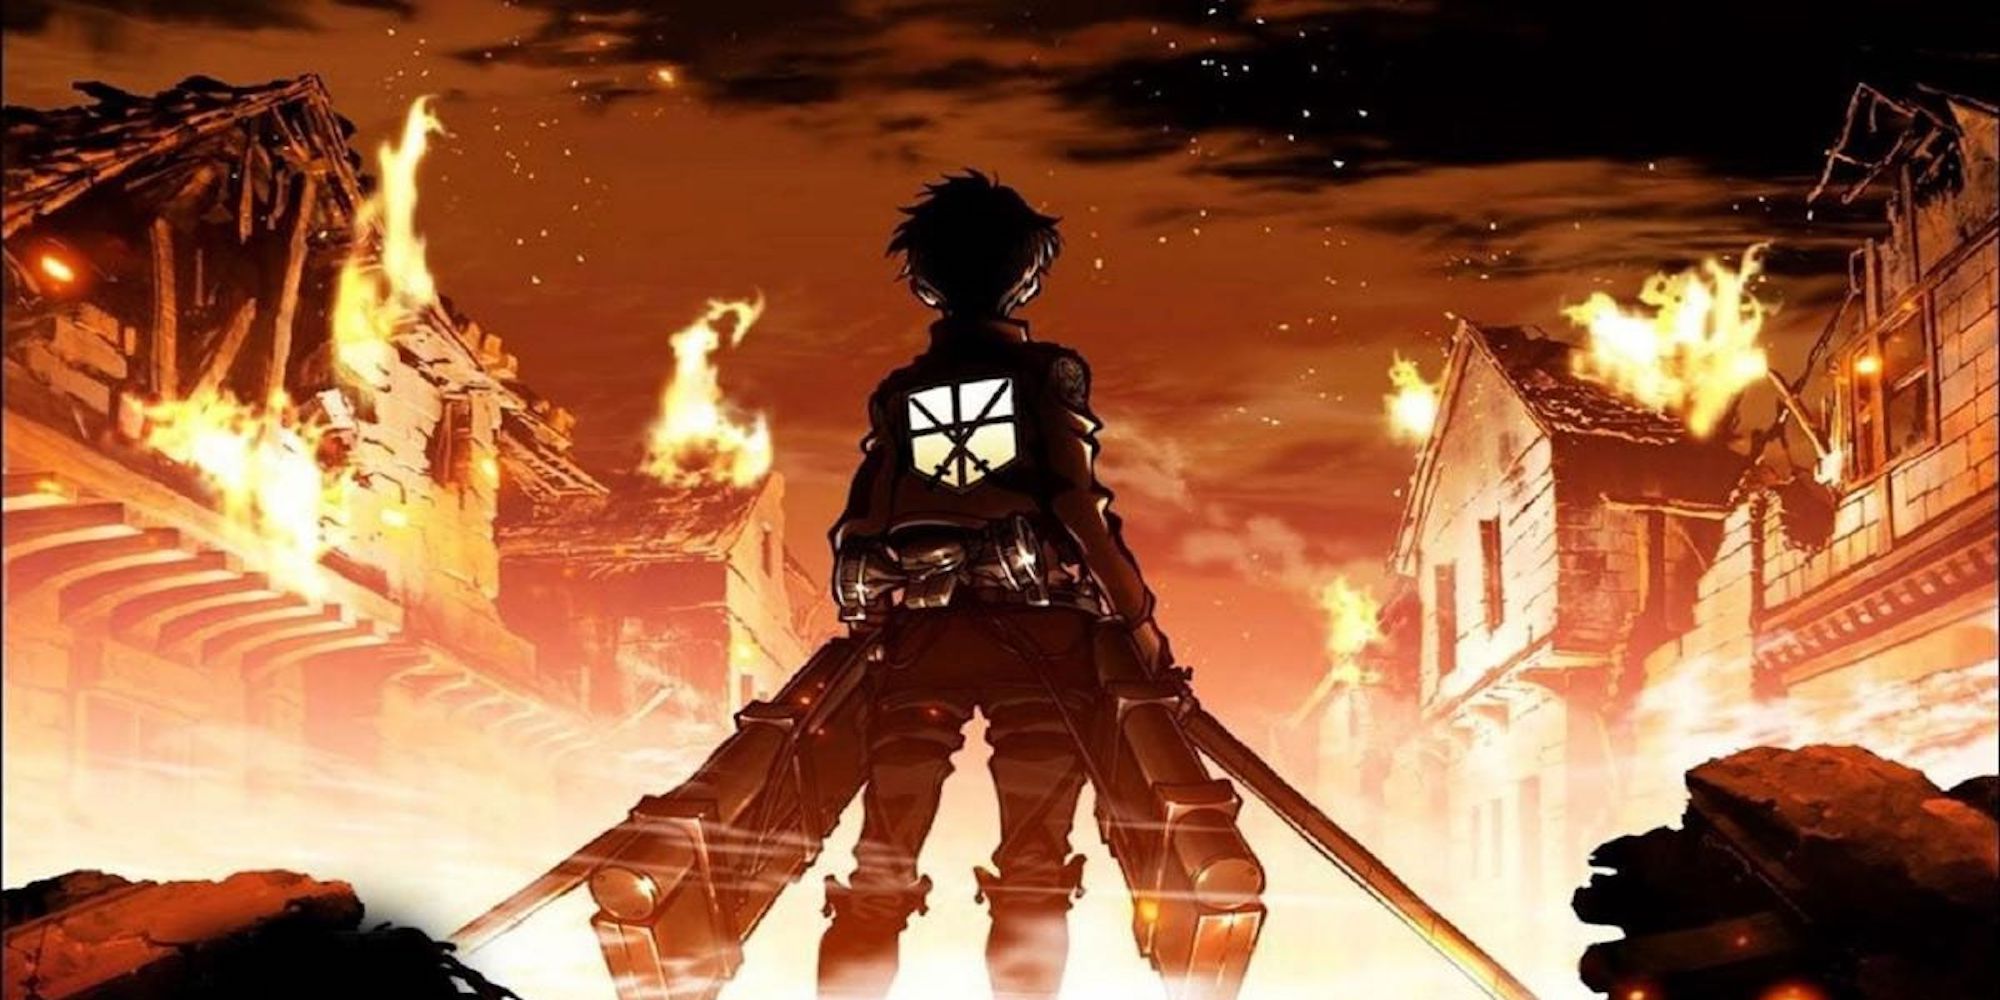 Eren Yeager surrounded by fire with his back turned towards the audience (Attack on Titan)